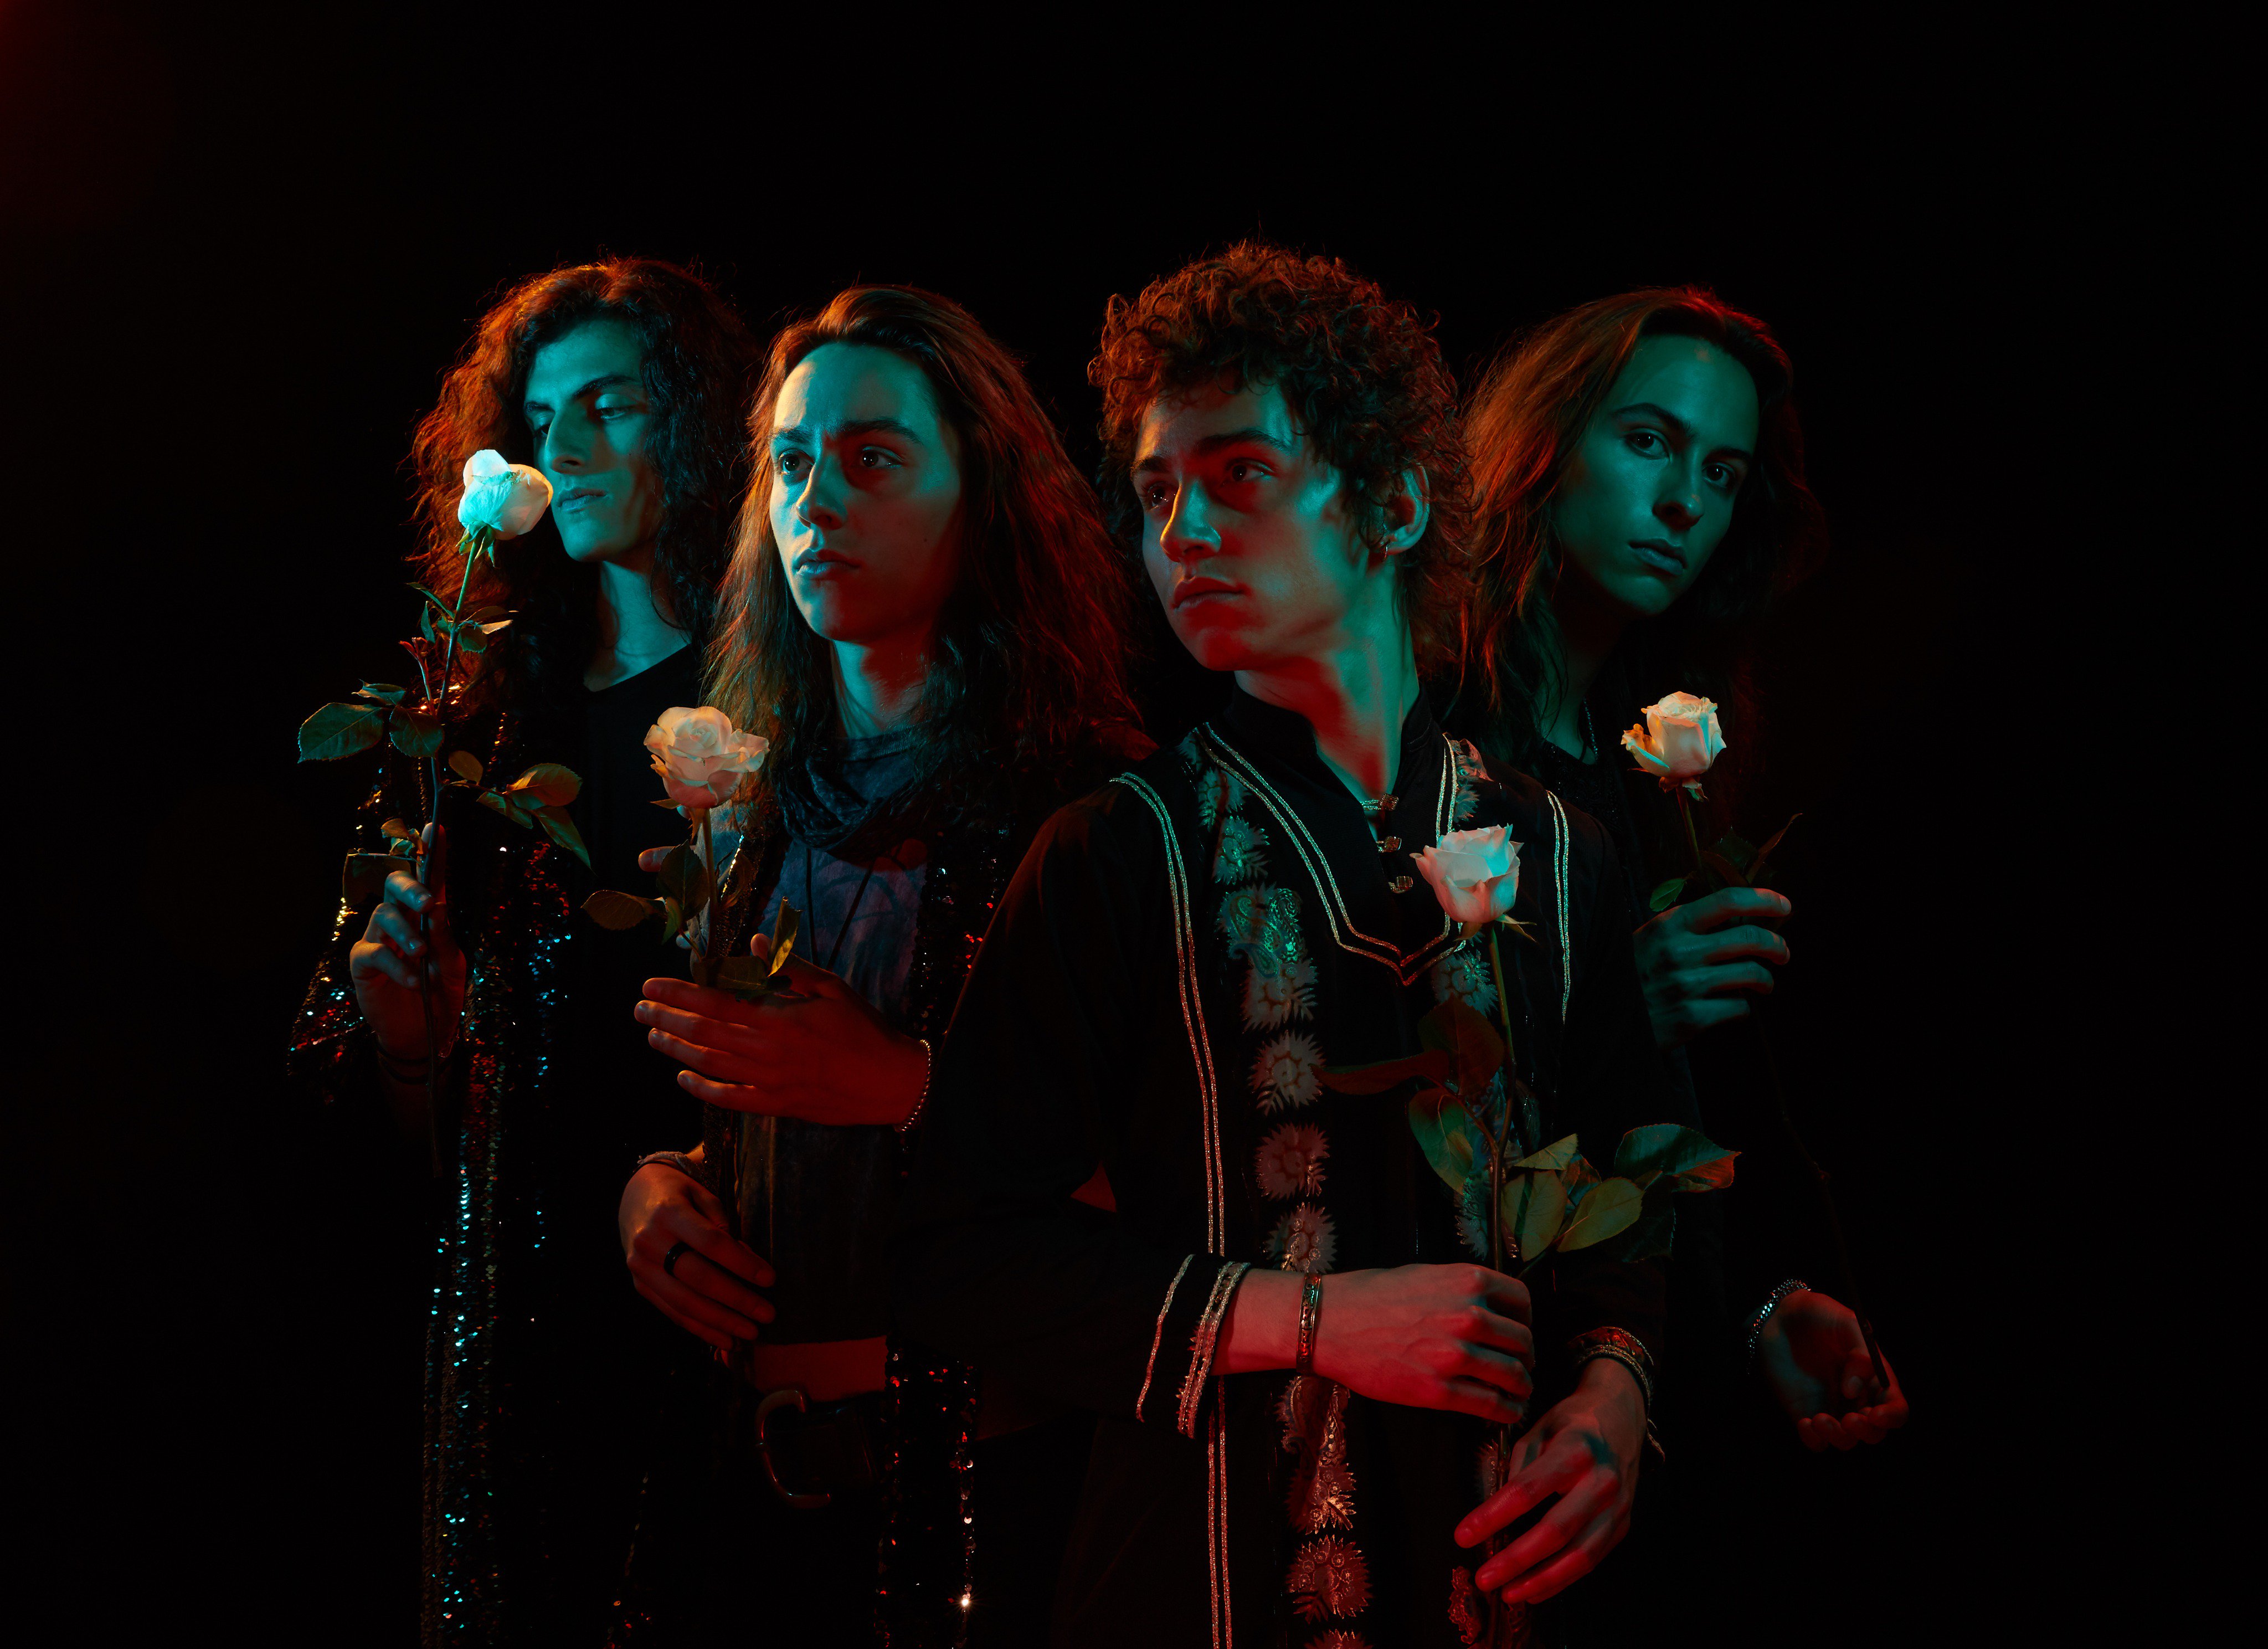 Greta Van Fleet on Twitter: "It's a remarkable demonstration of support to  have “When the Curtain Falls” selected by @amazonmusic as their #SOTD.  #JustAsk, “Alexa, play the Song of the Day” to